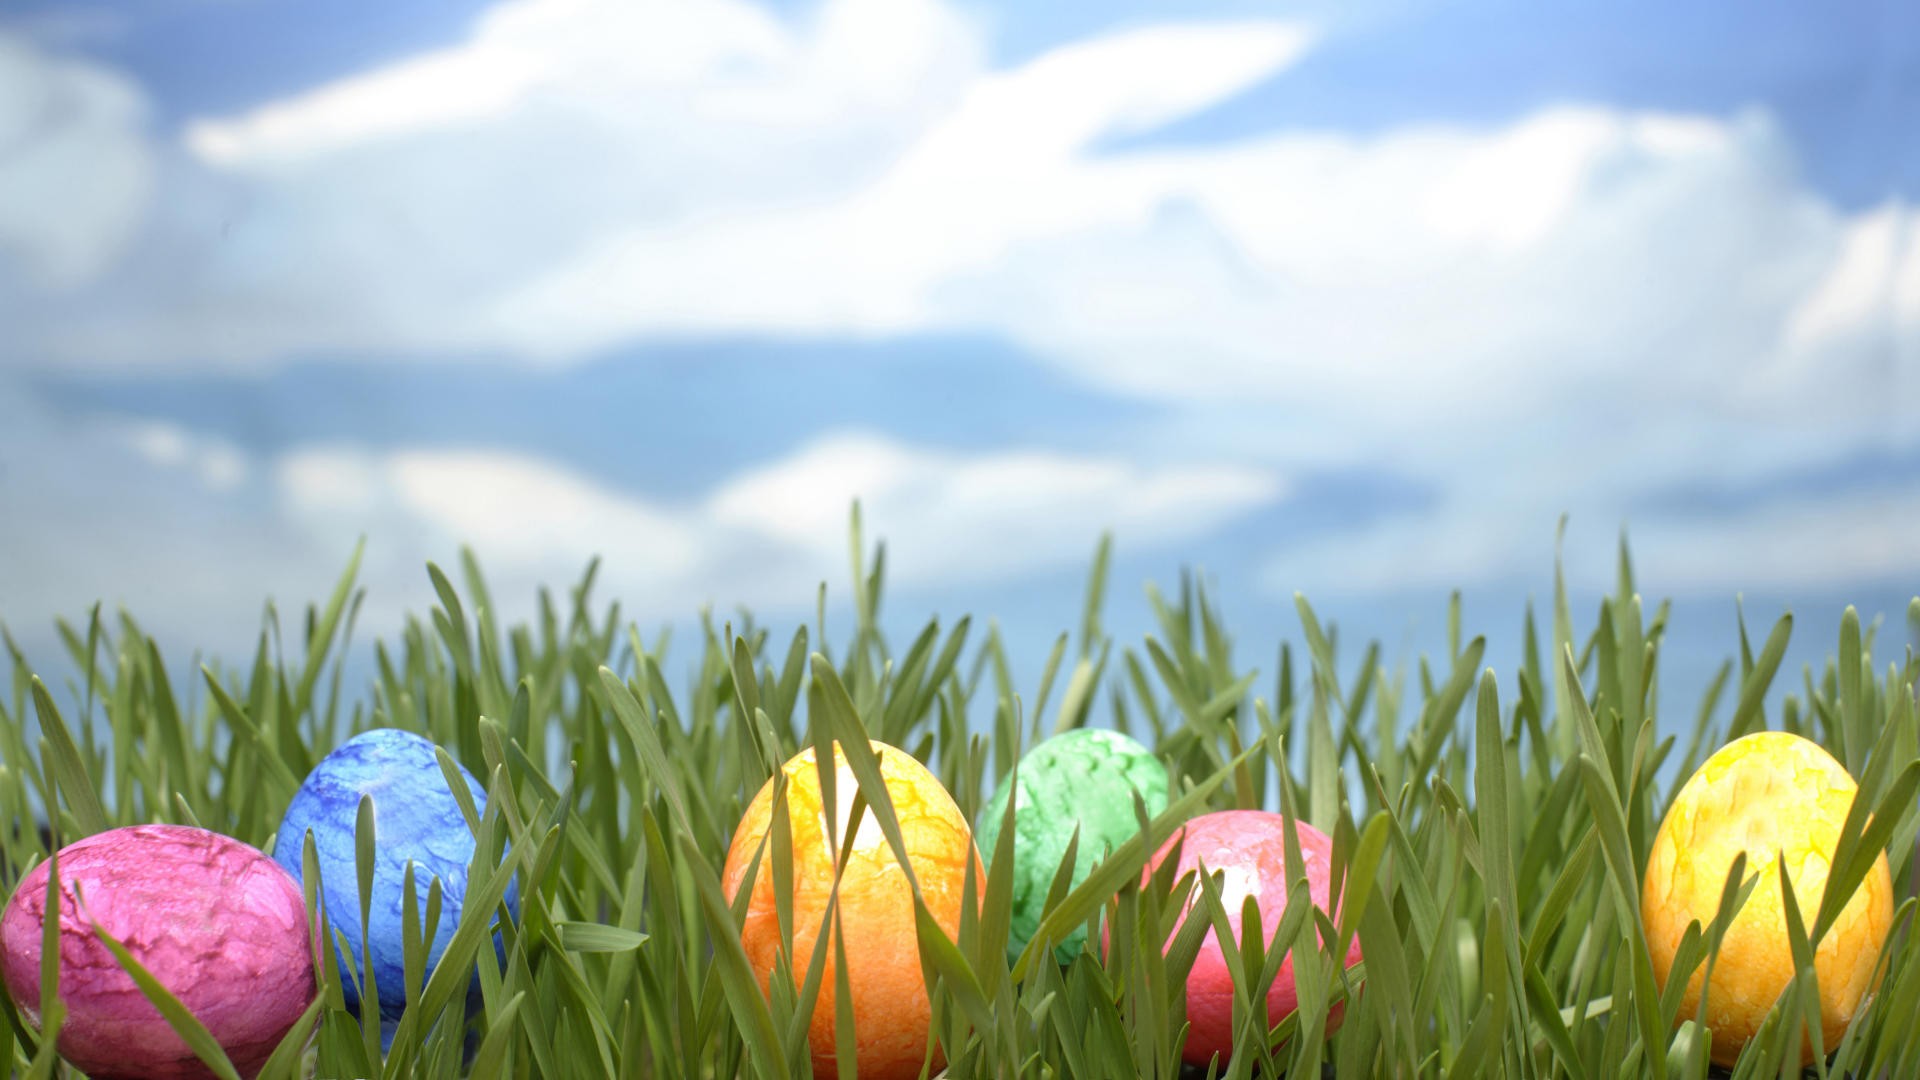 easter wallpaper spring images 1920x1080 1920x1080